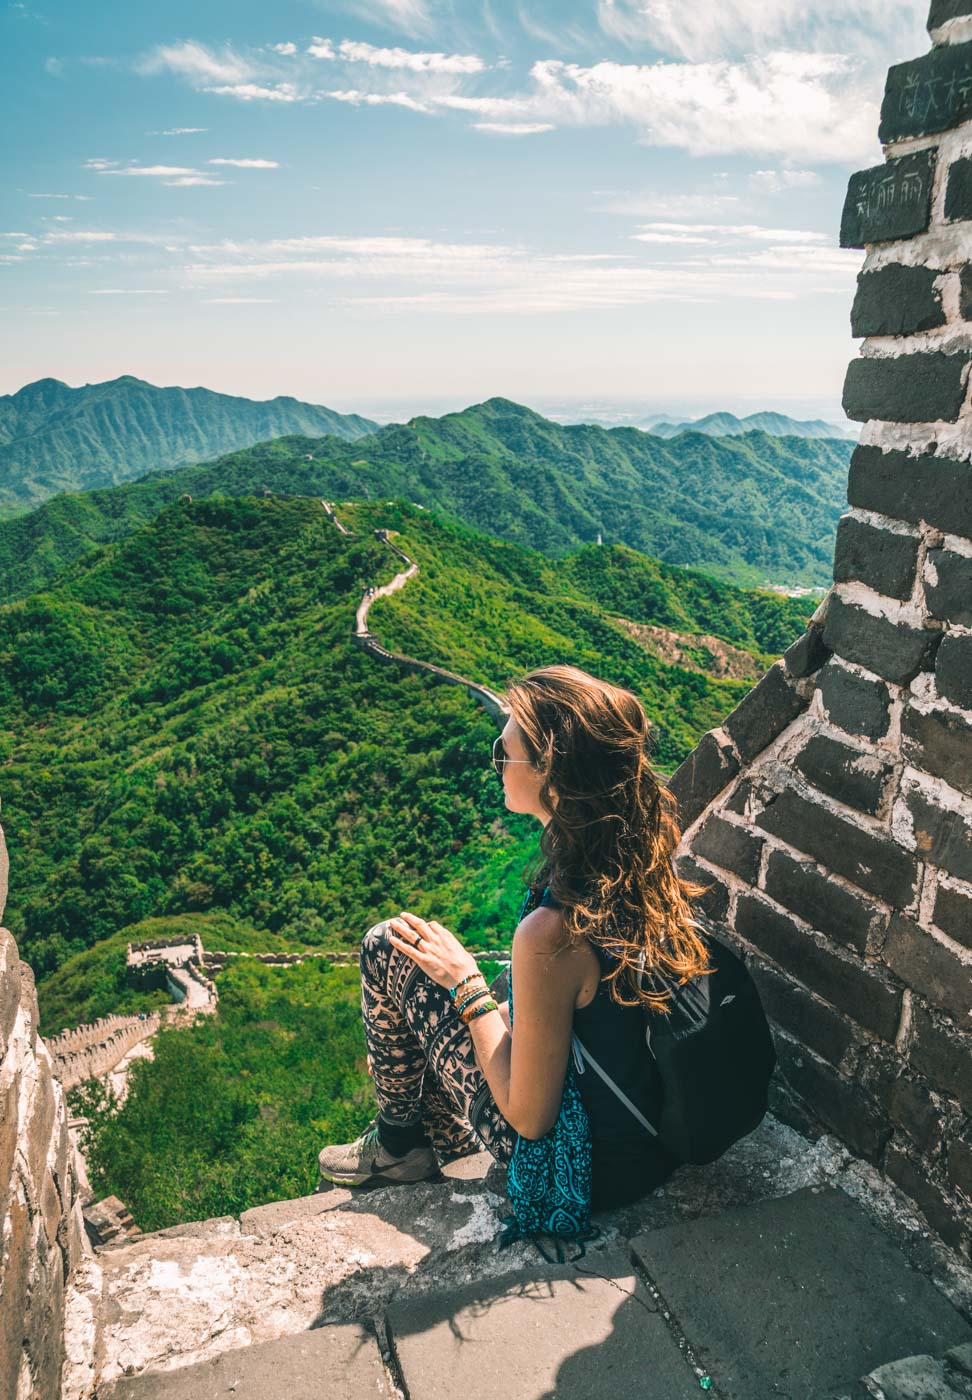 Oksana, with the amazing view from the Great Wall